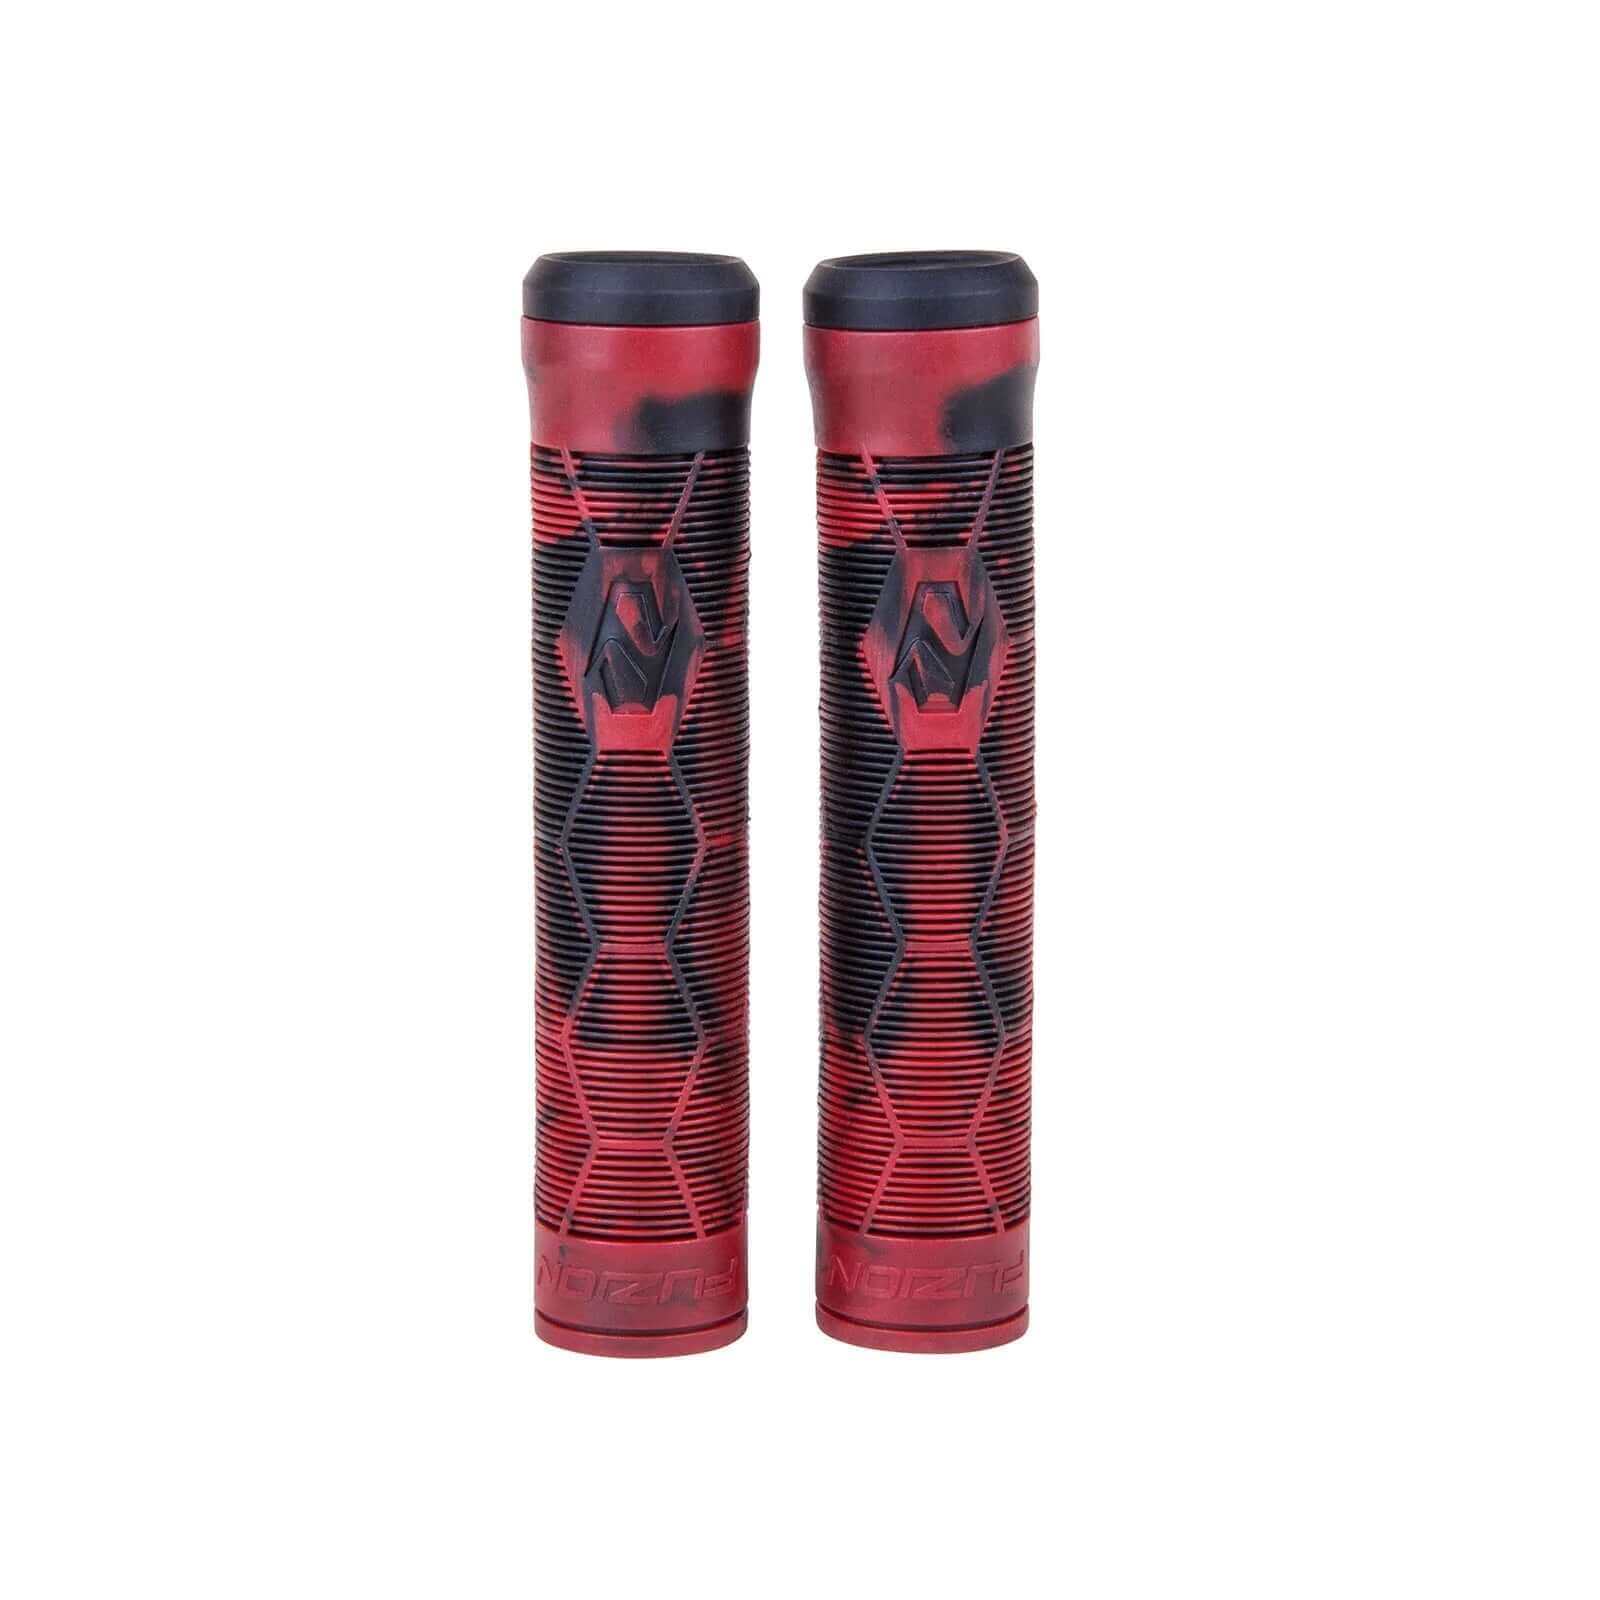 FUZION GRIPS BLACK/RED Fuzion Hex Grips